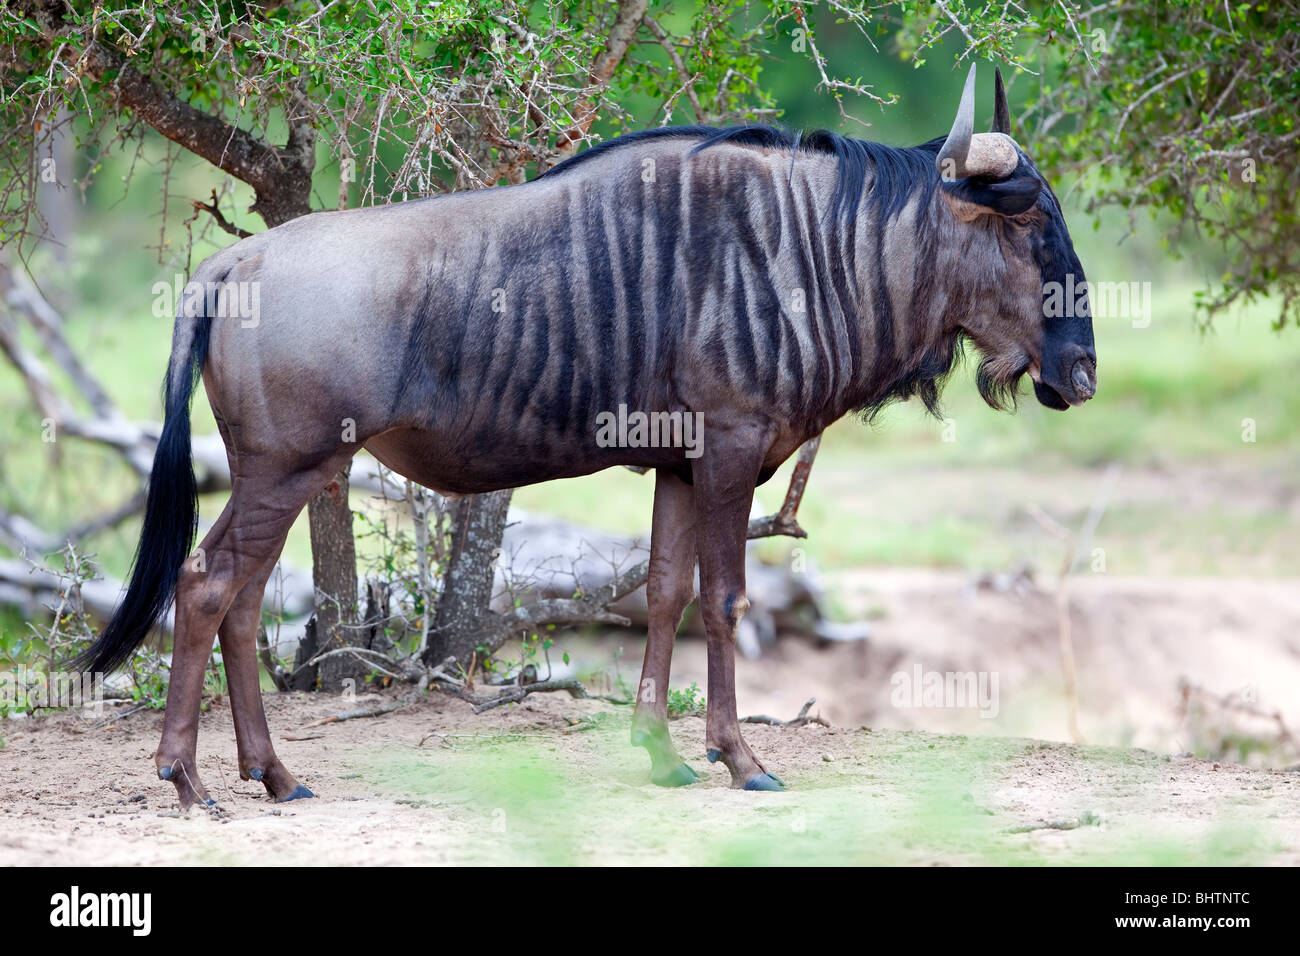 Blue wildebeest photographed in the African bush Stock Photo